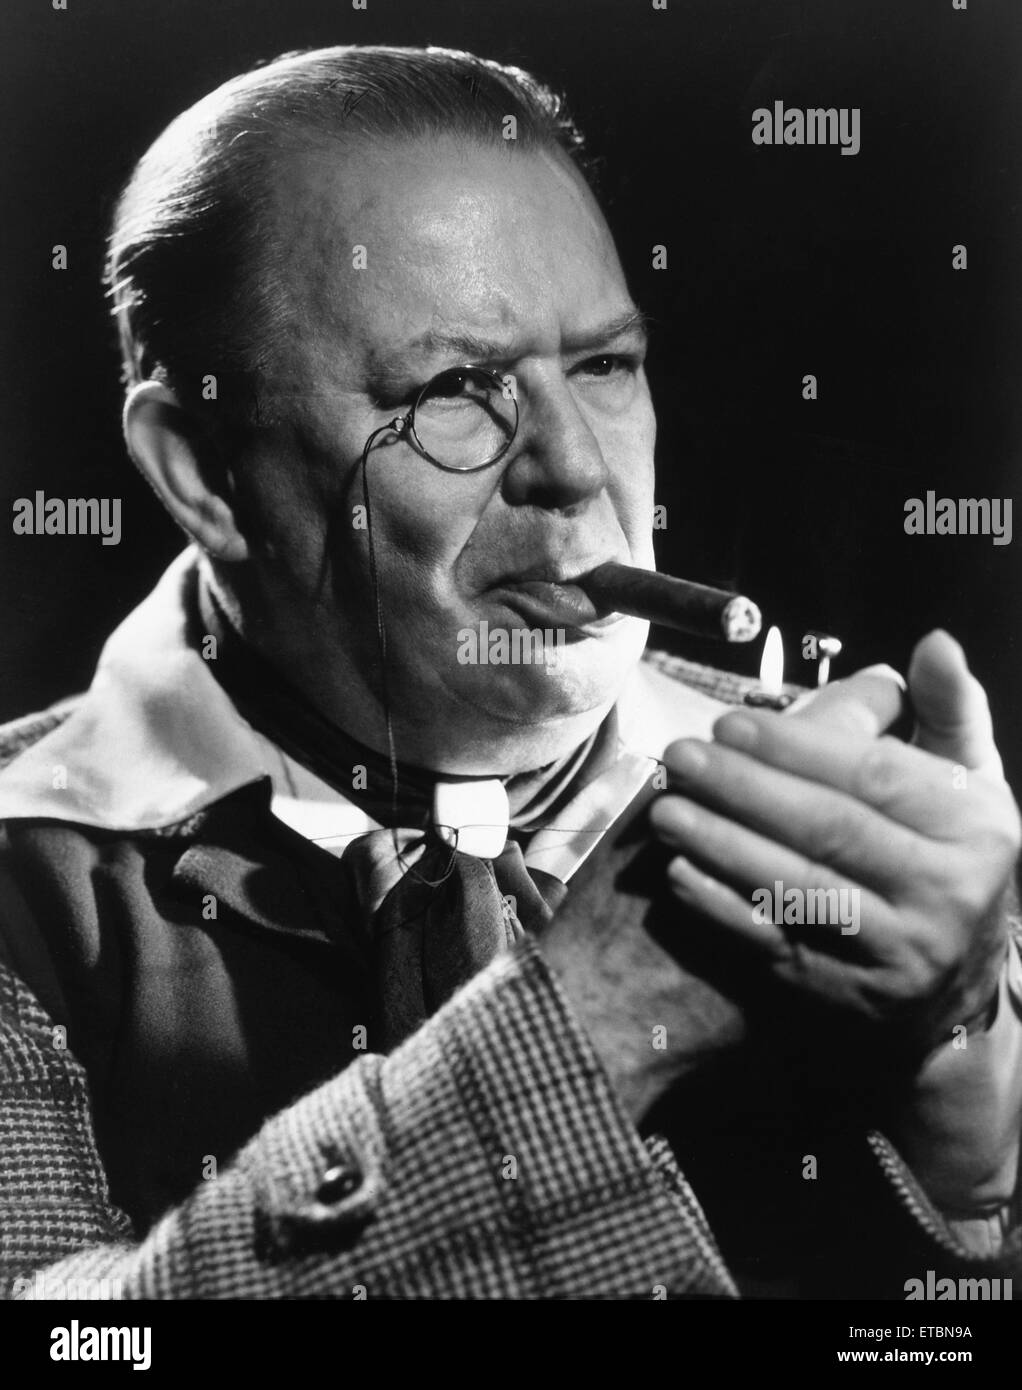 Charles Coburn, Publicity Portrait for the Film 'The More the Merrier', 1943 Stock Photo